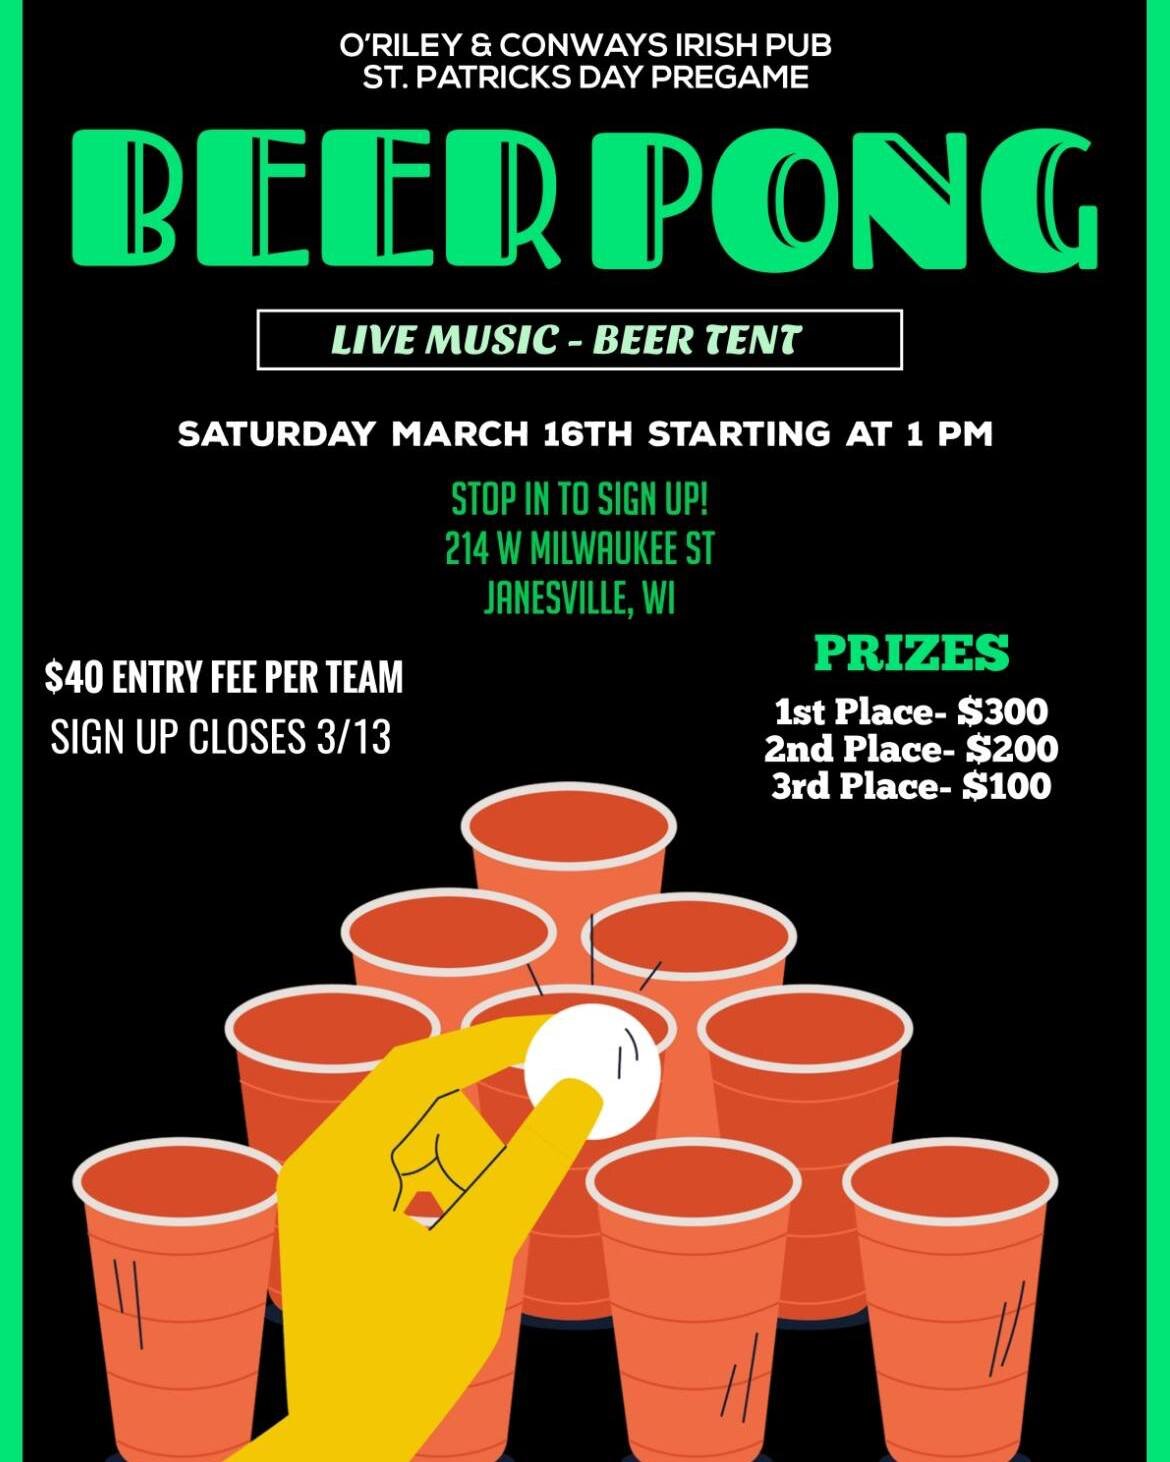 Hey friends! We hope everyone is having a marvelous monday!☘️
--
Just a quick reminder, we only have a couple days left to get signed up for the Four Leaf Fest Beer Pong Tournament!😎
--
Get your partner, pick a team name and pop into the pub to sign